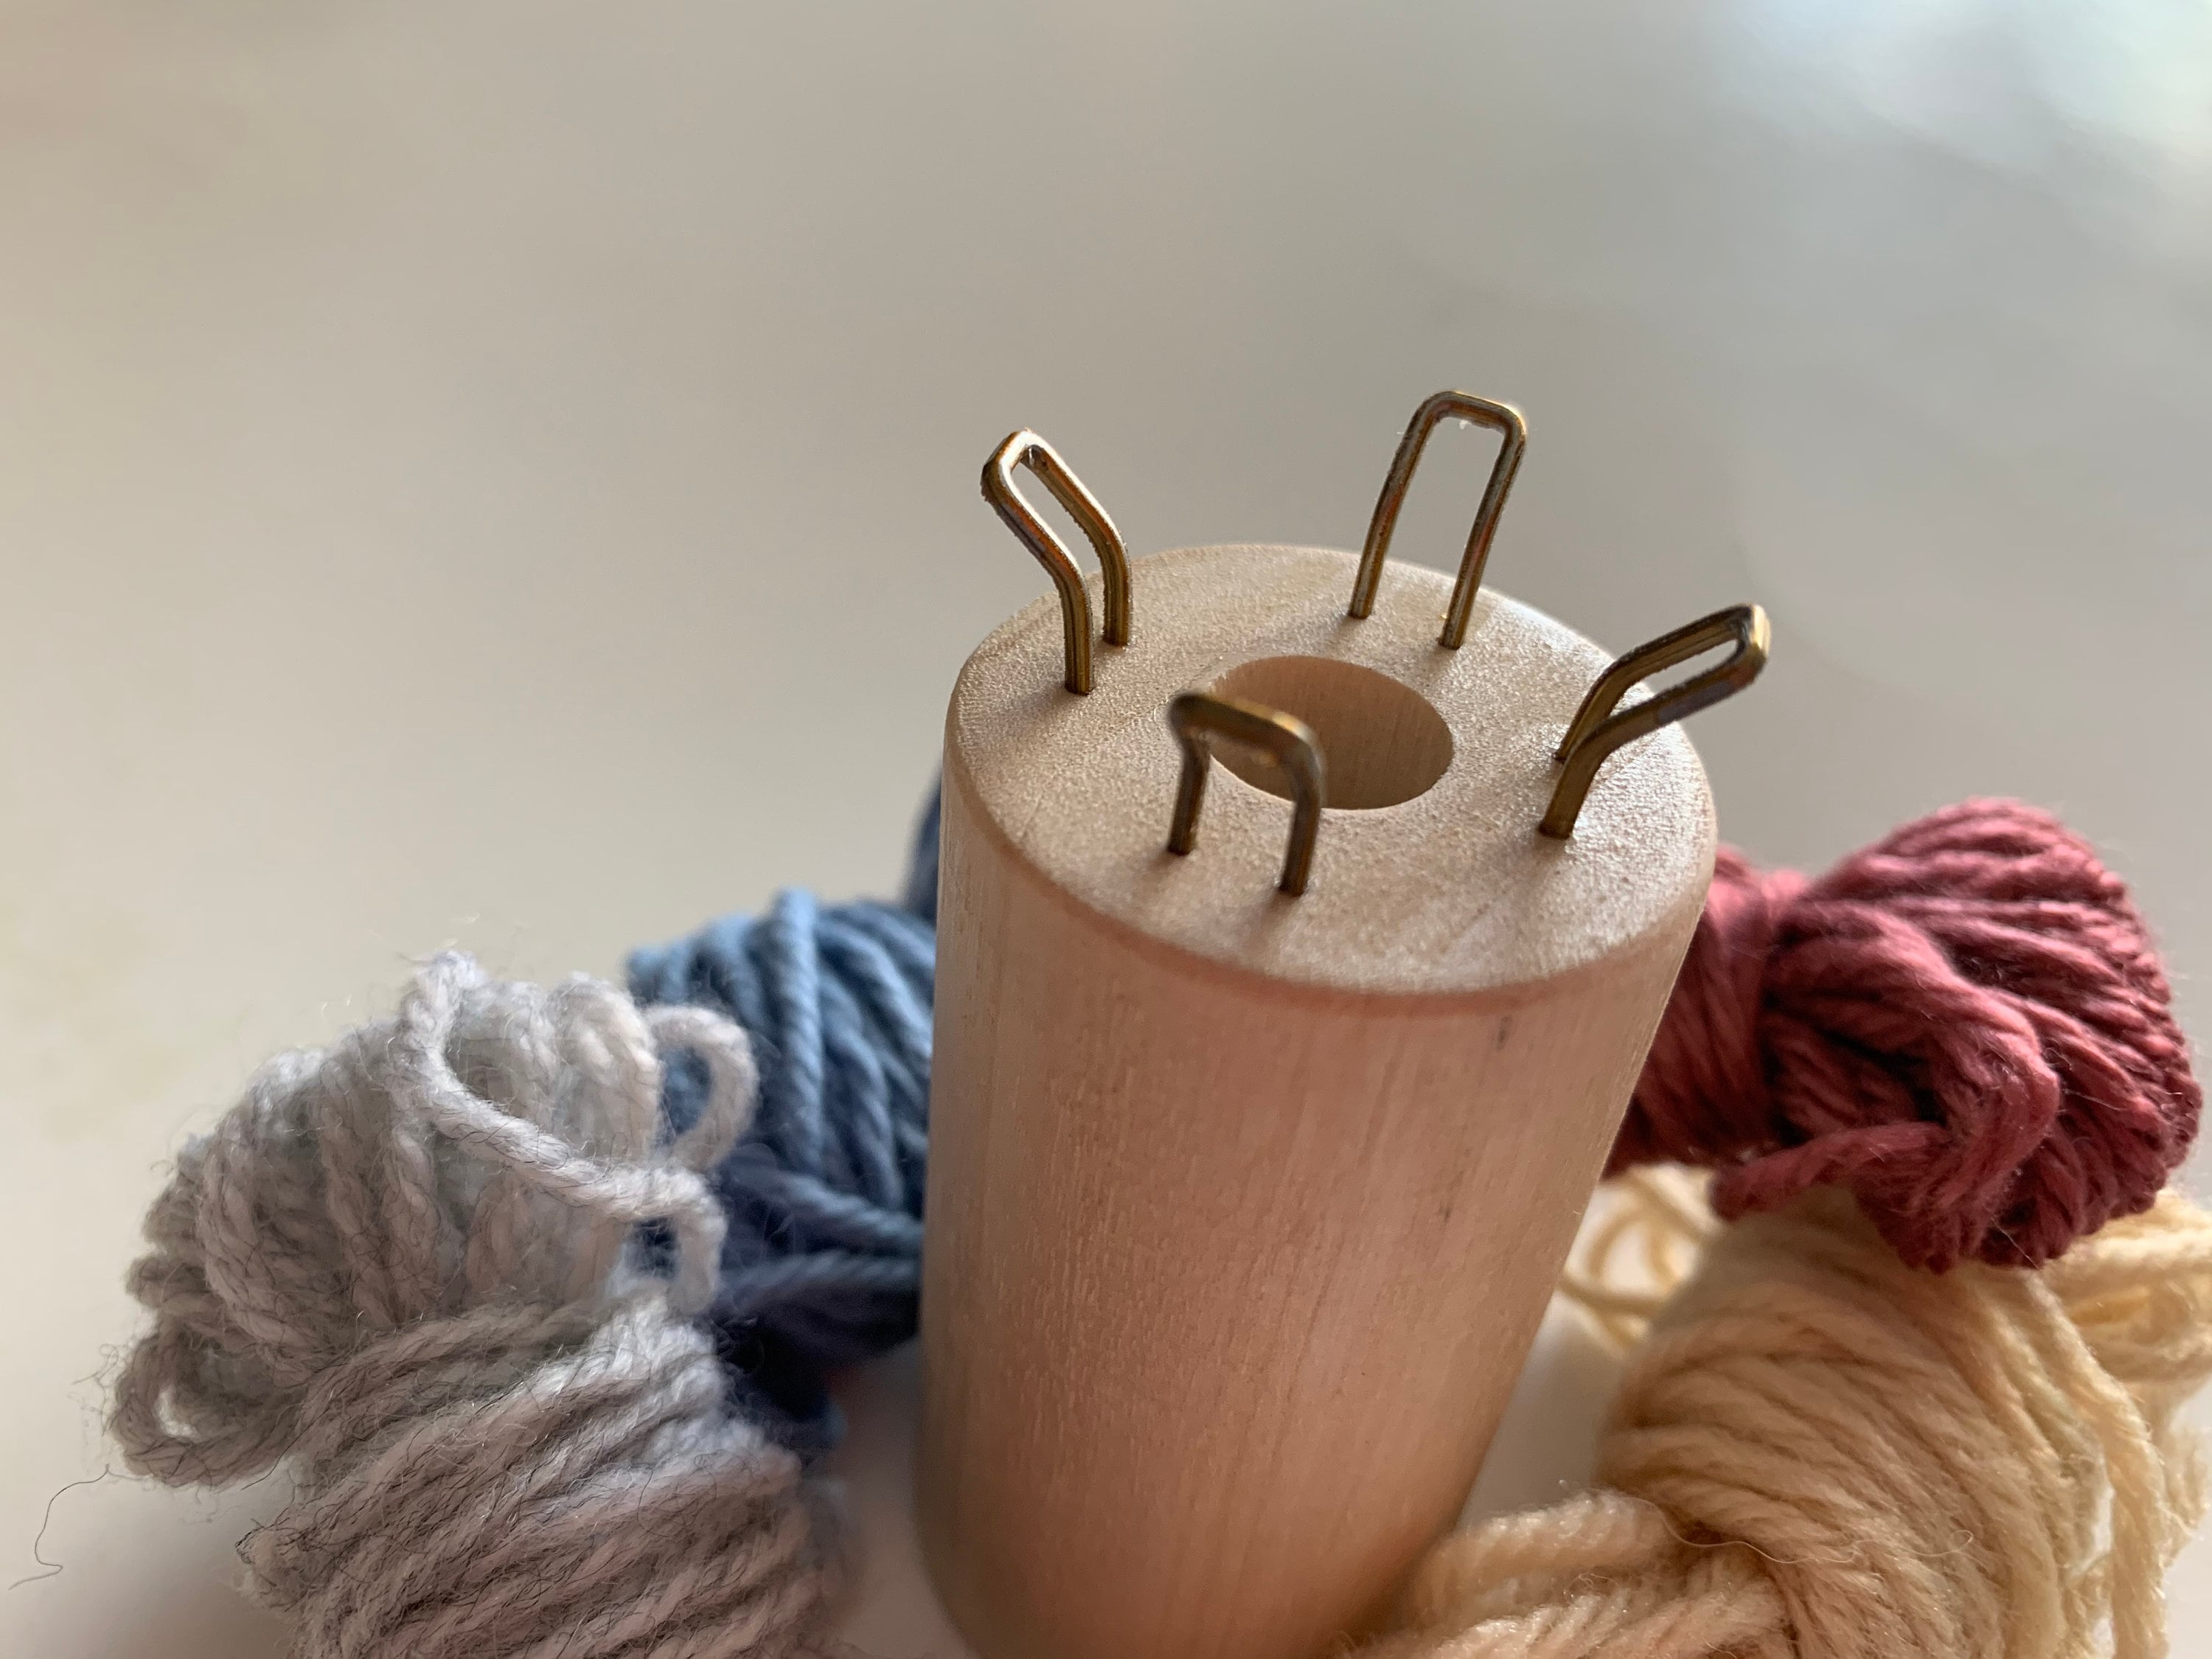 Knit Its! Tin-To-Go Knitting Kit For Beginners - Spool Knitting